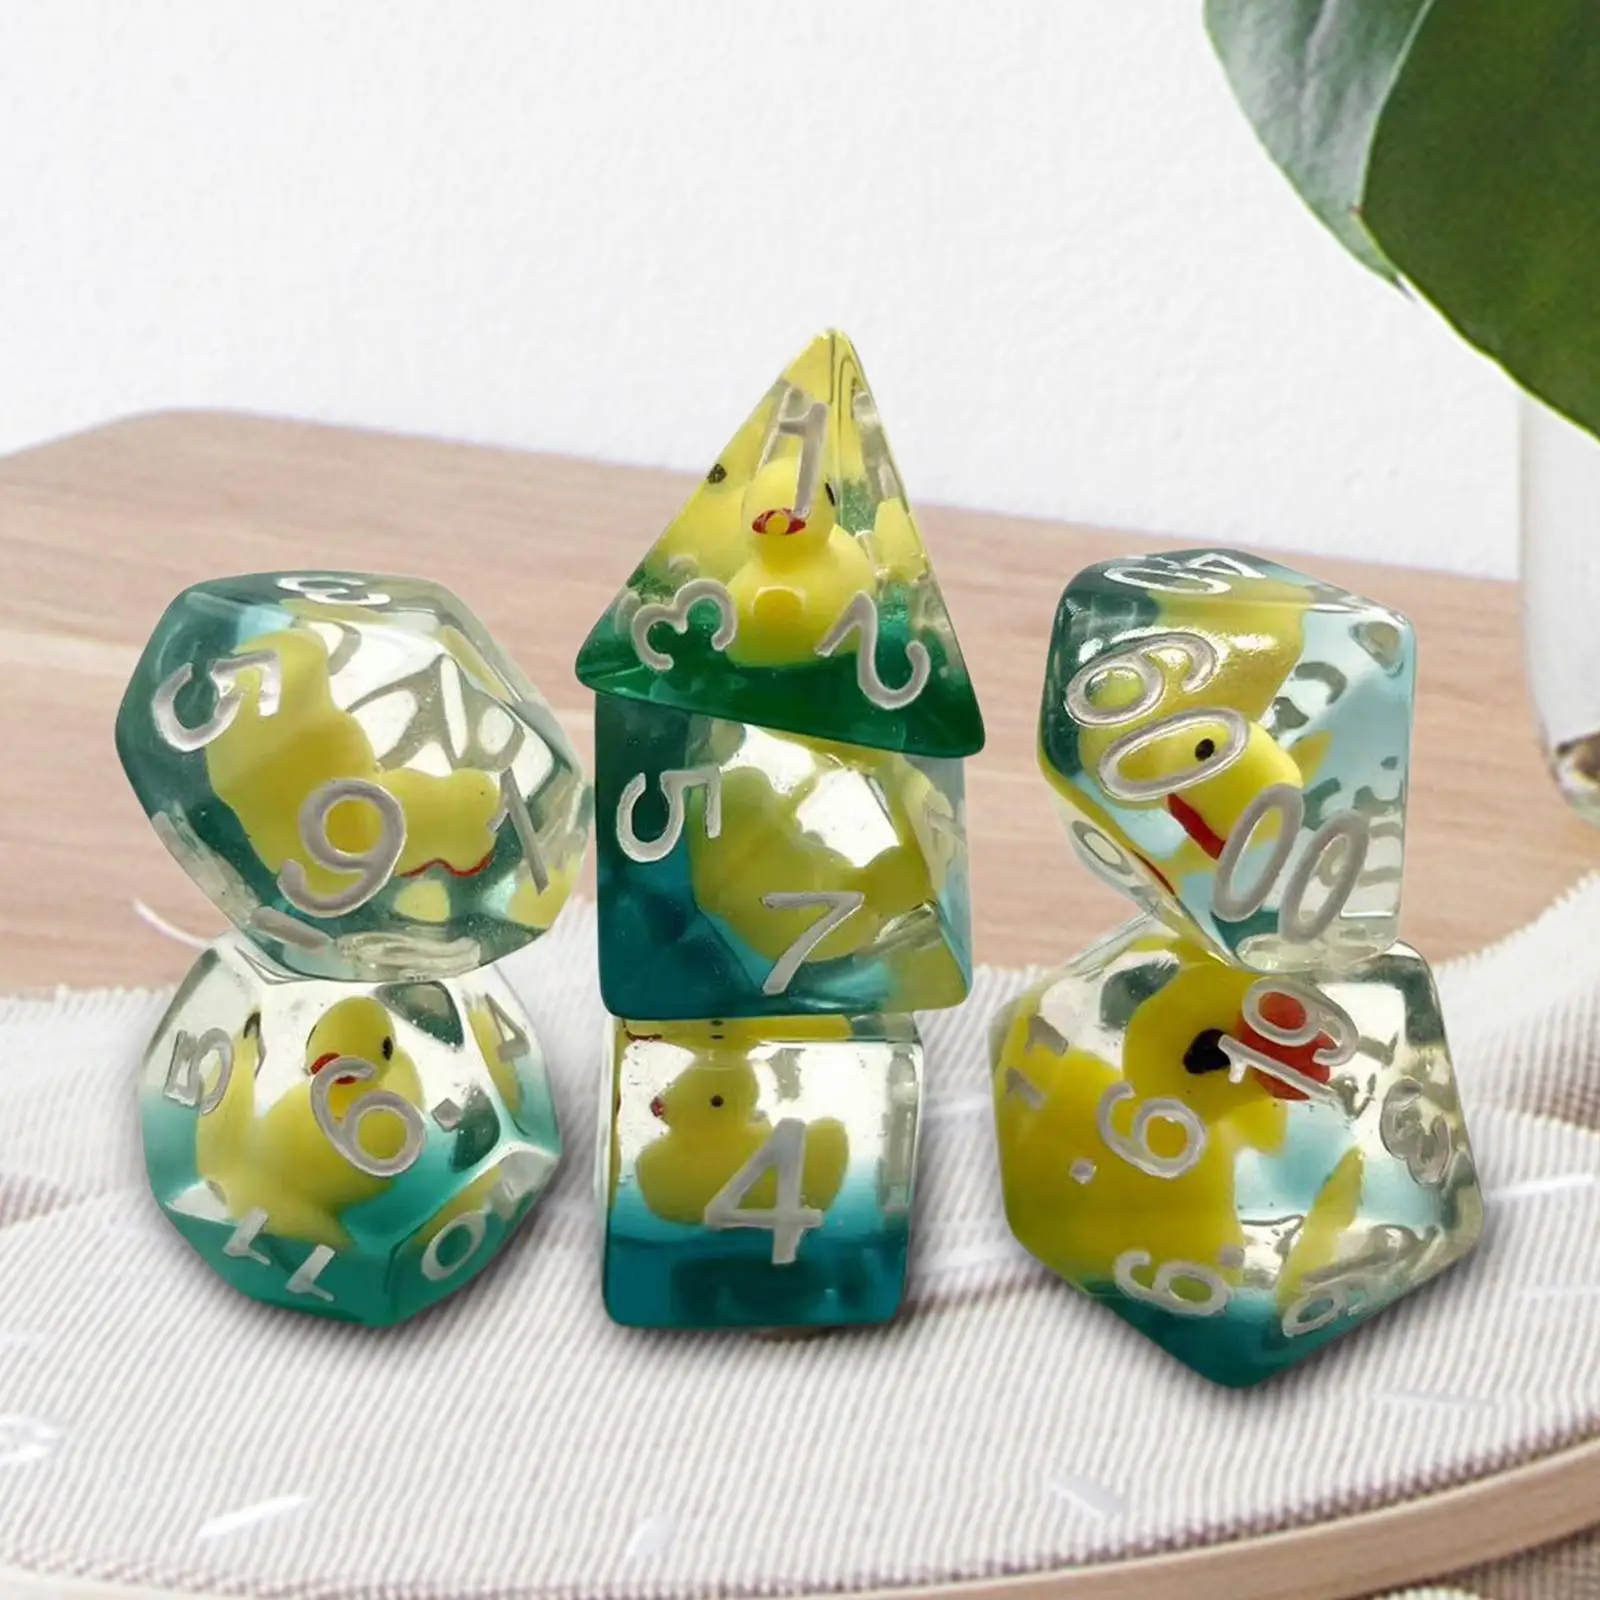 7x Multi Sided Polyhedral Dices Set Entertainment Toys D4-D20 for MTG Role